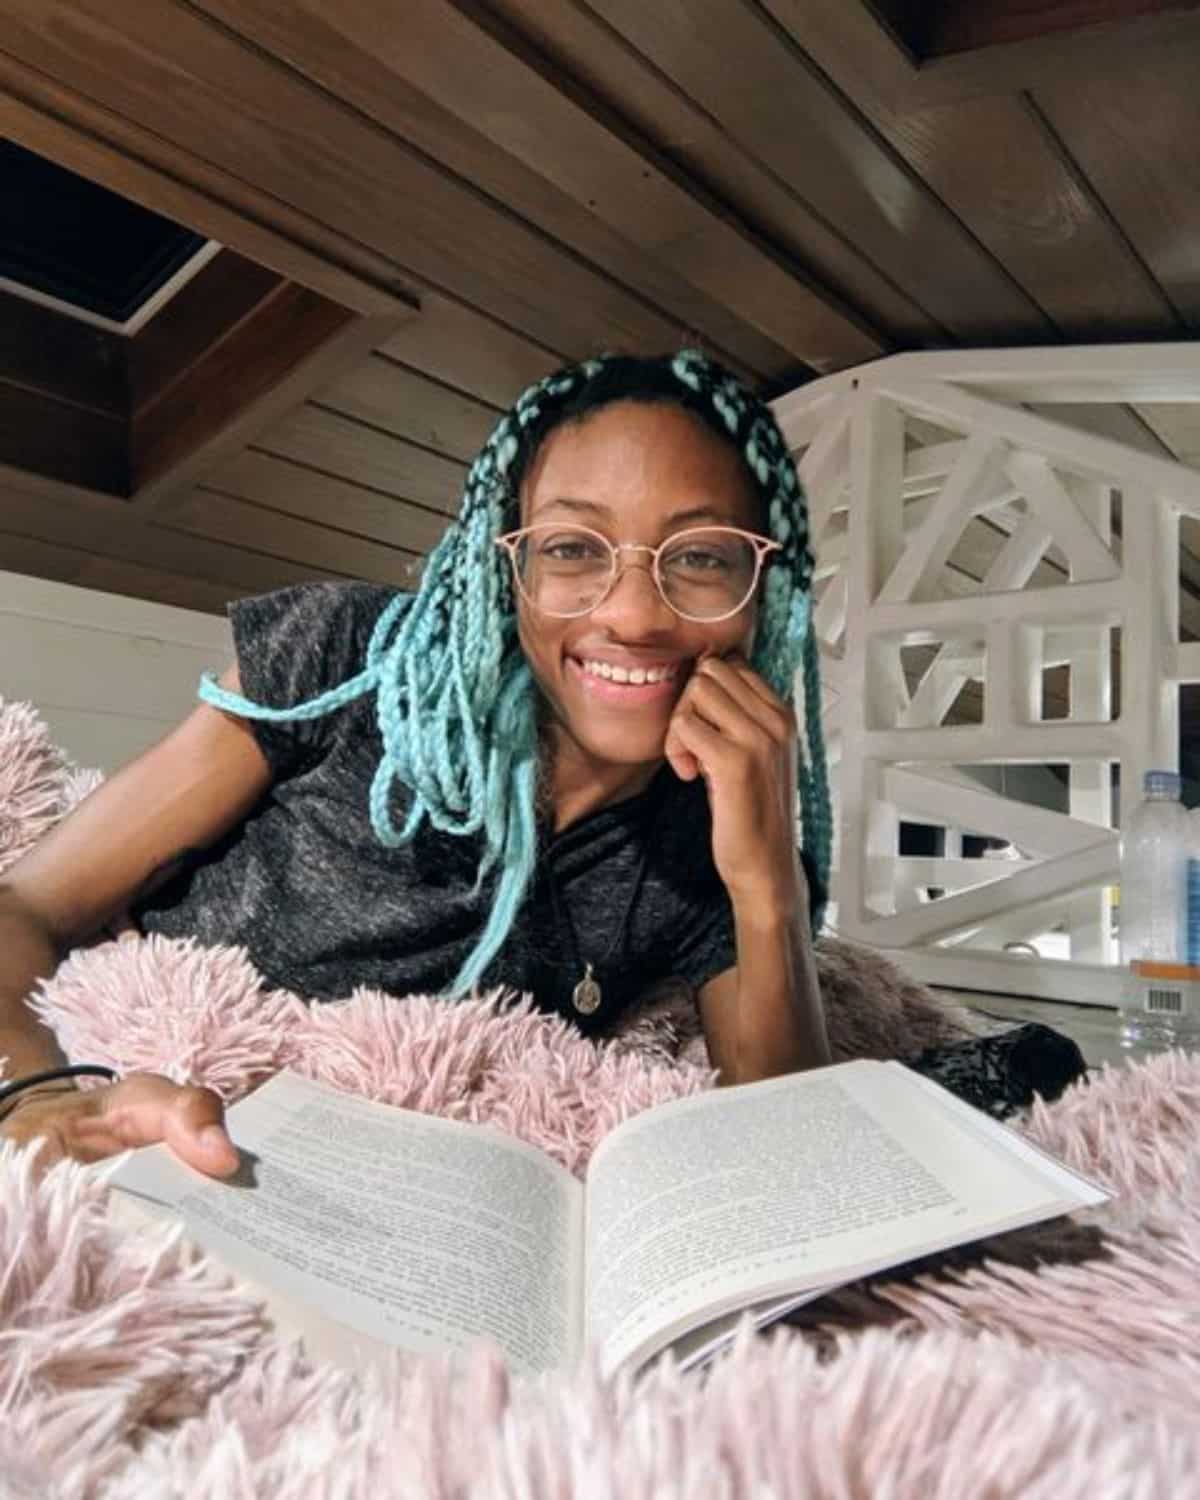 woman with blue braids on bed with book